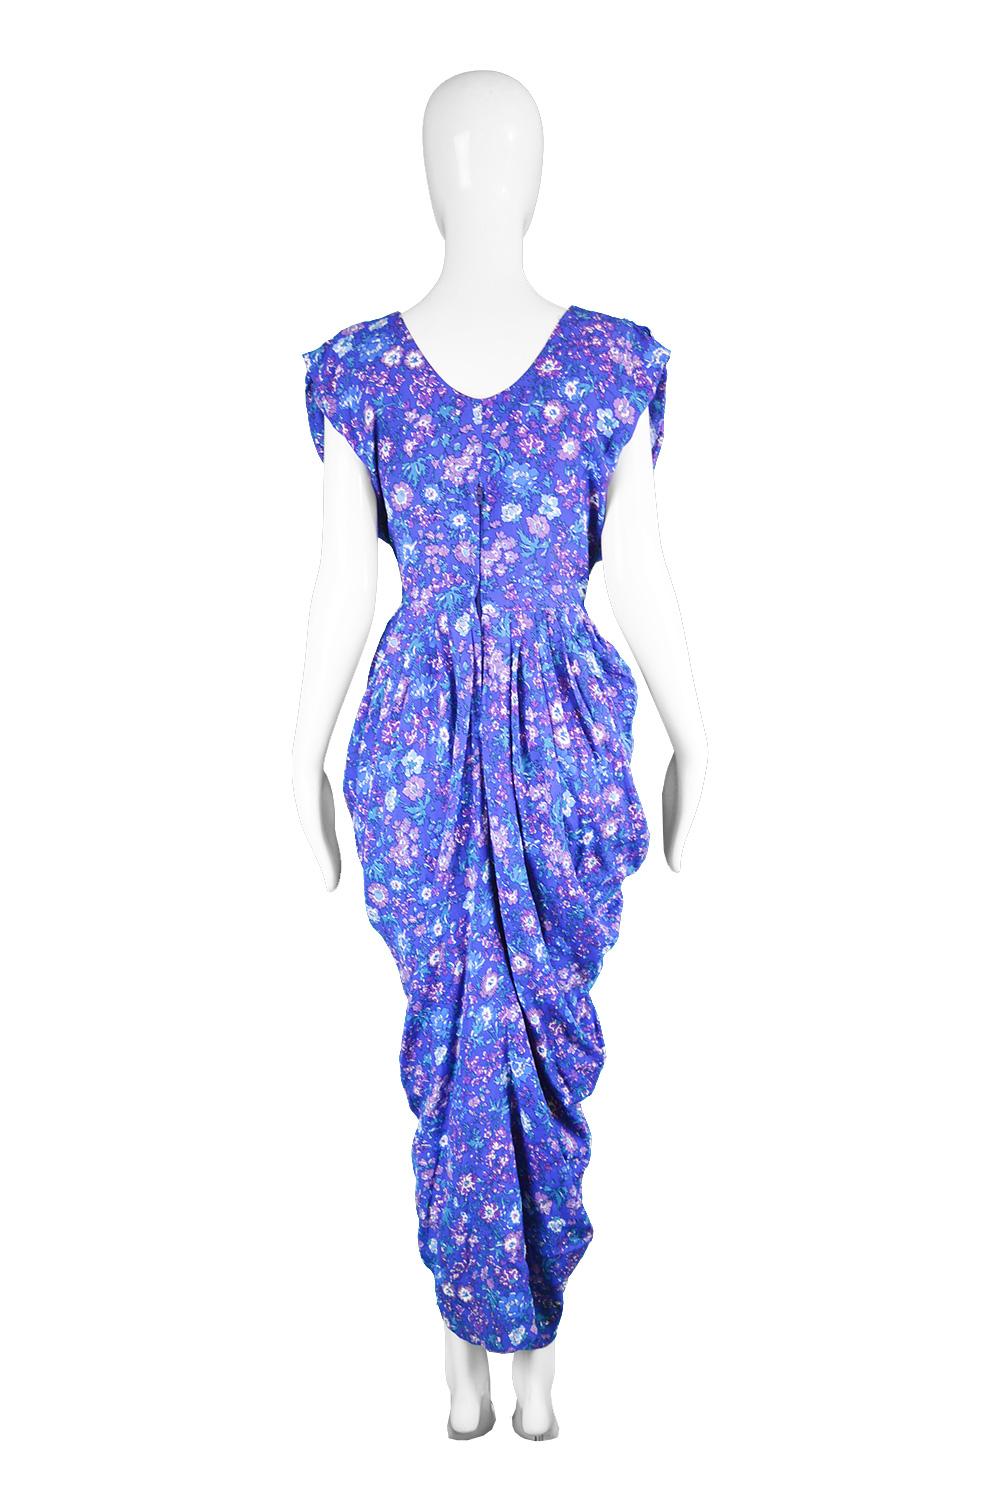 Droopy & Brown Draped Blue Floral Print Vintage Viscose Maxi Dress, 1980s For Sale 2